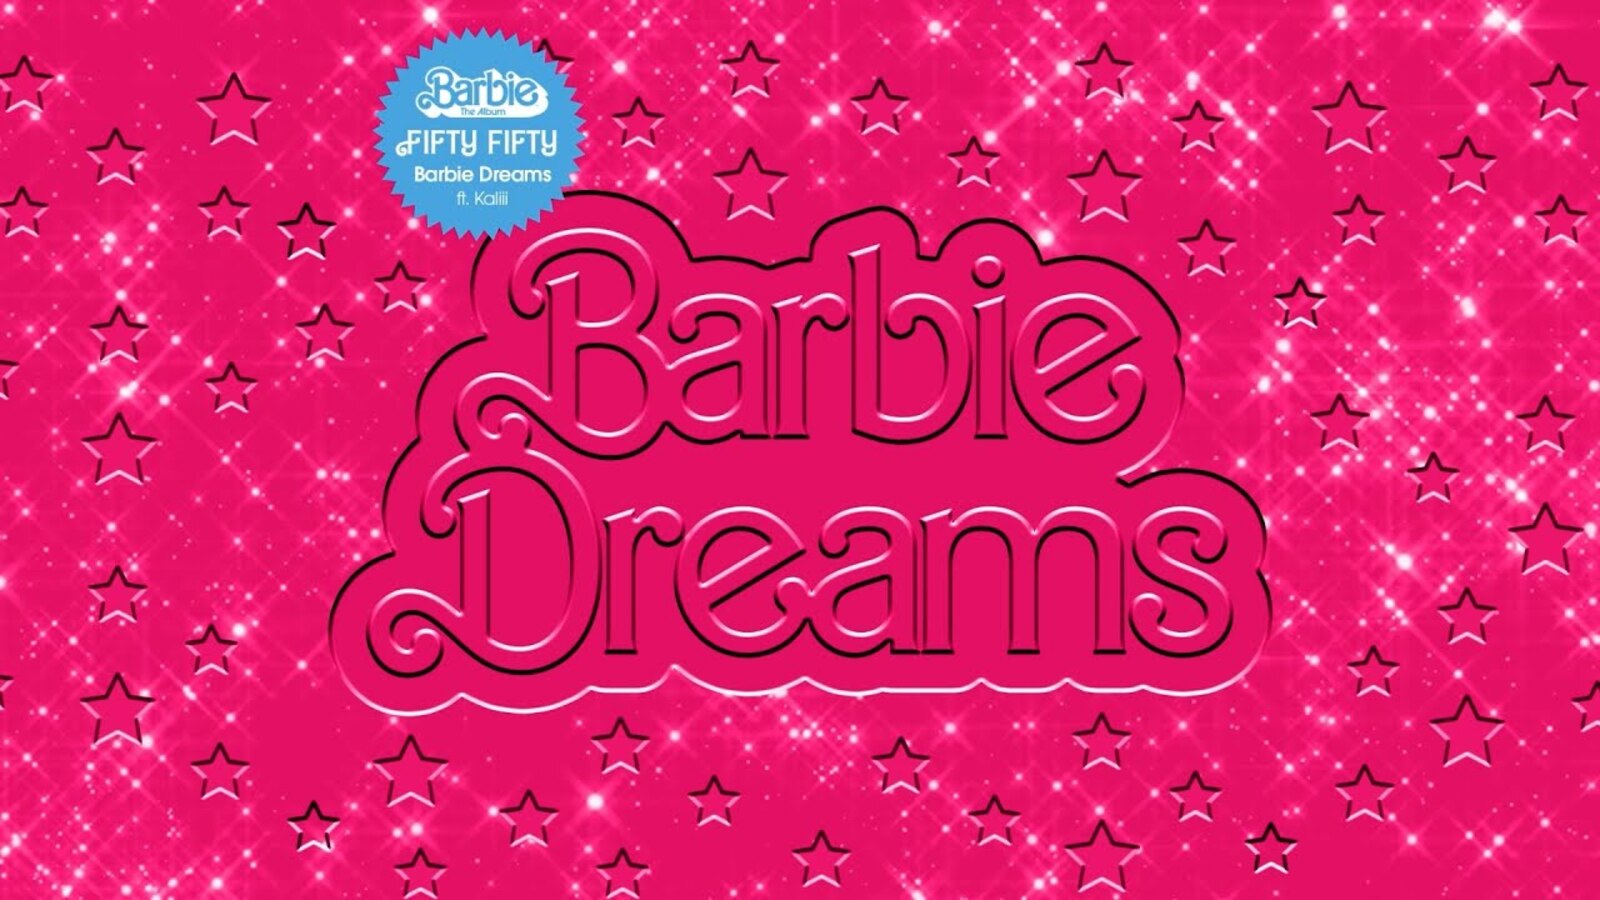 Barbie, in the soundtrack of the film also a song by the K-Pop band FIFTY FIFTY: let's listen to 'Barbie Dreams'